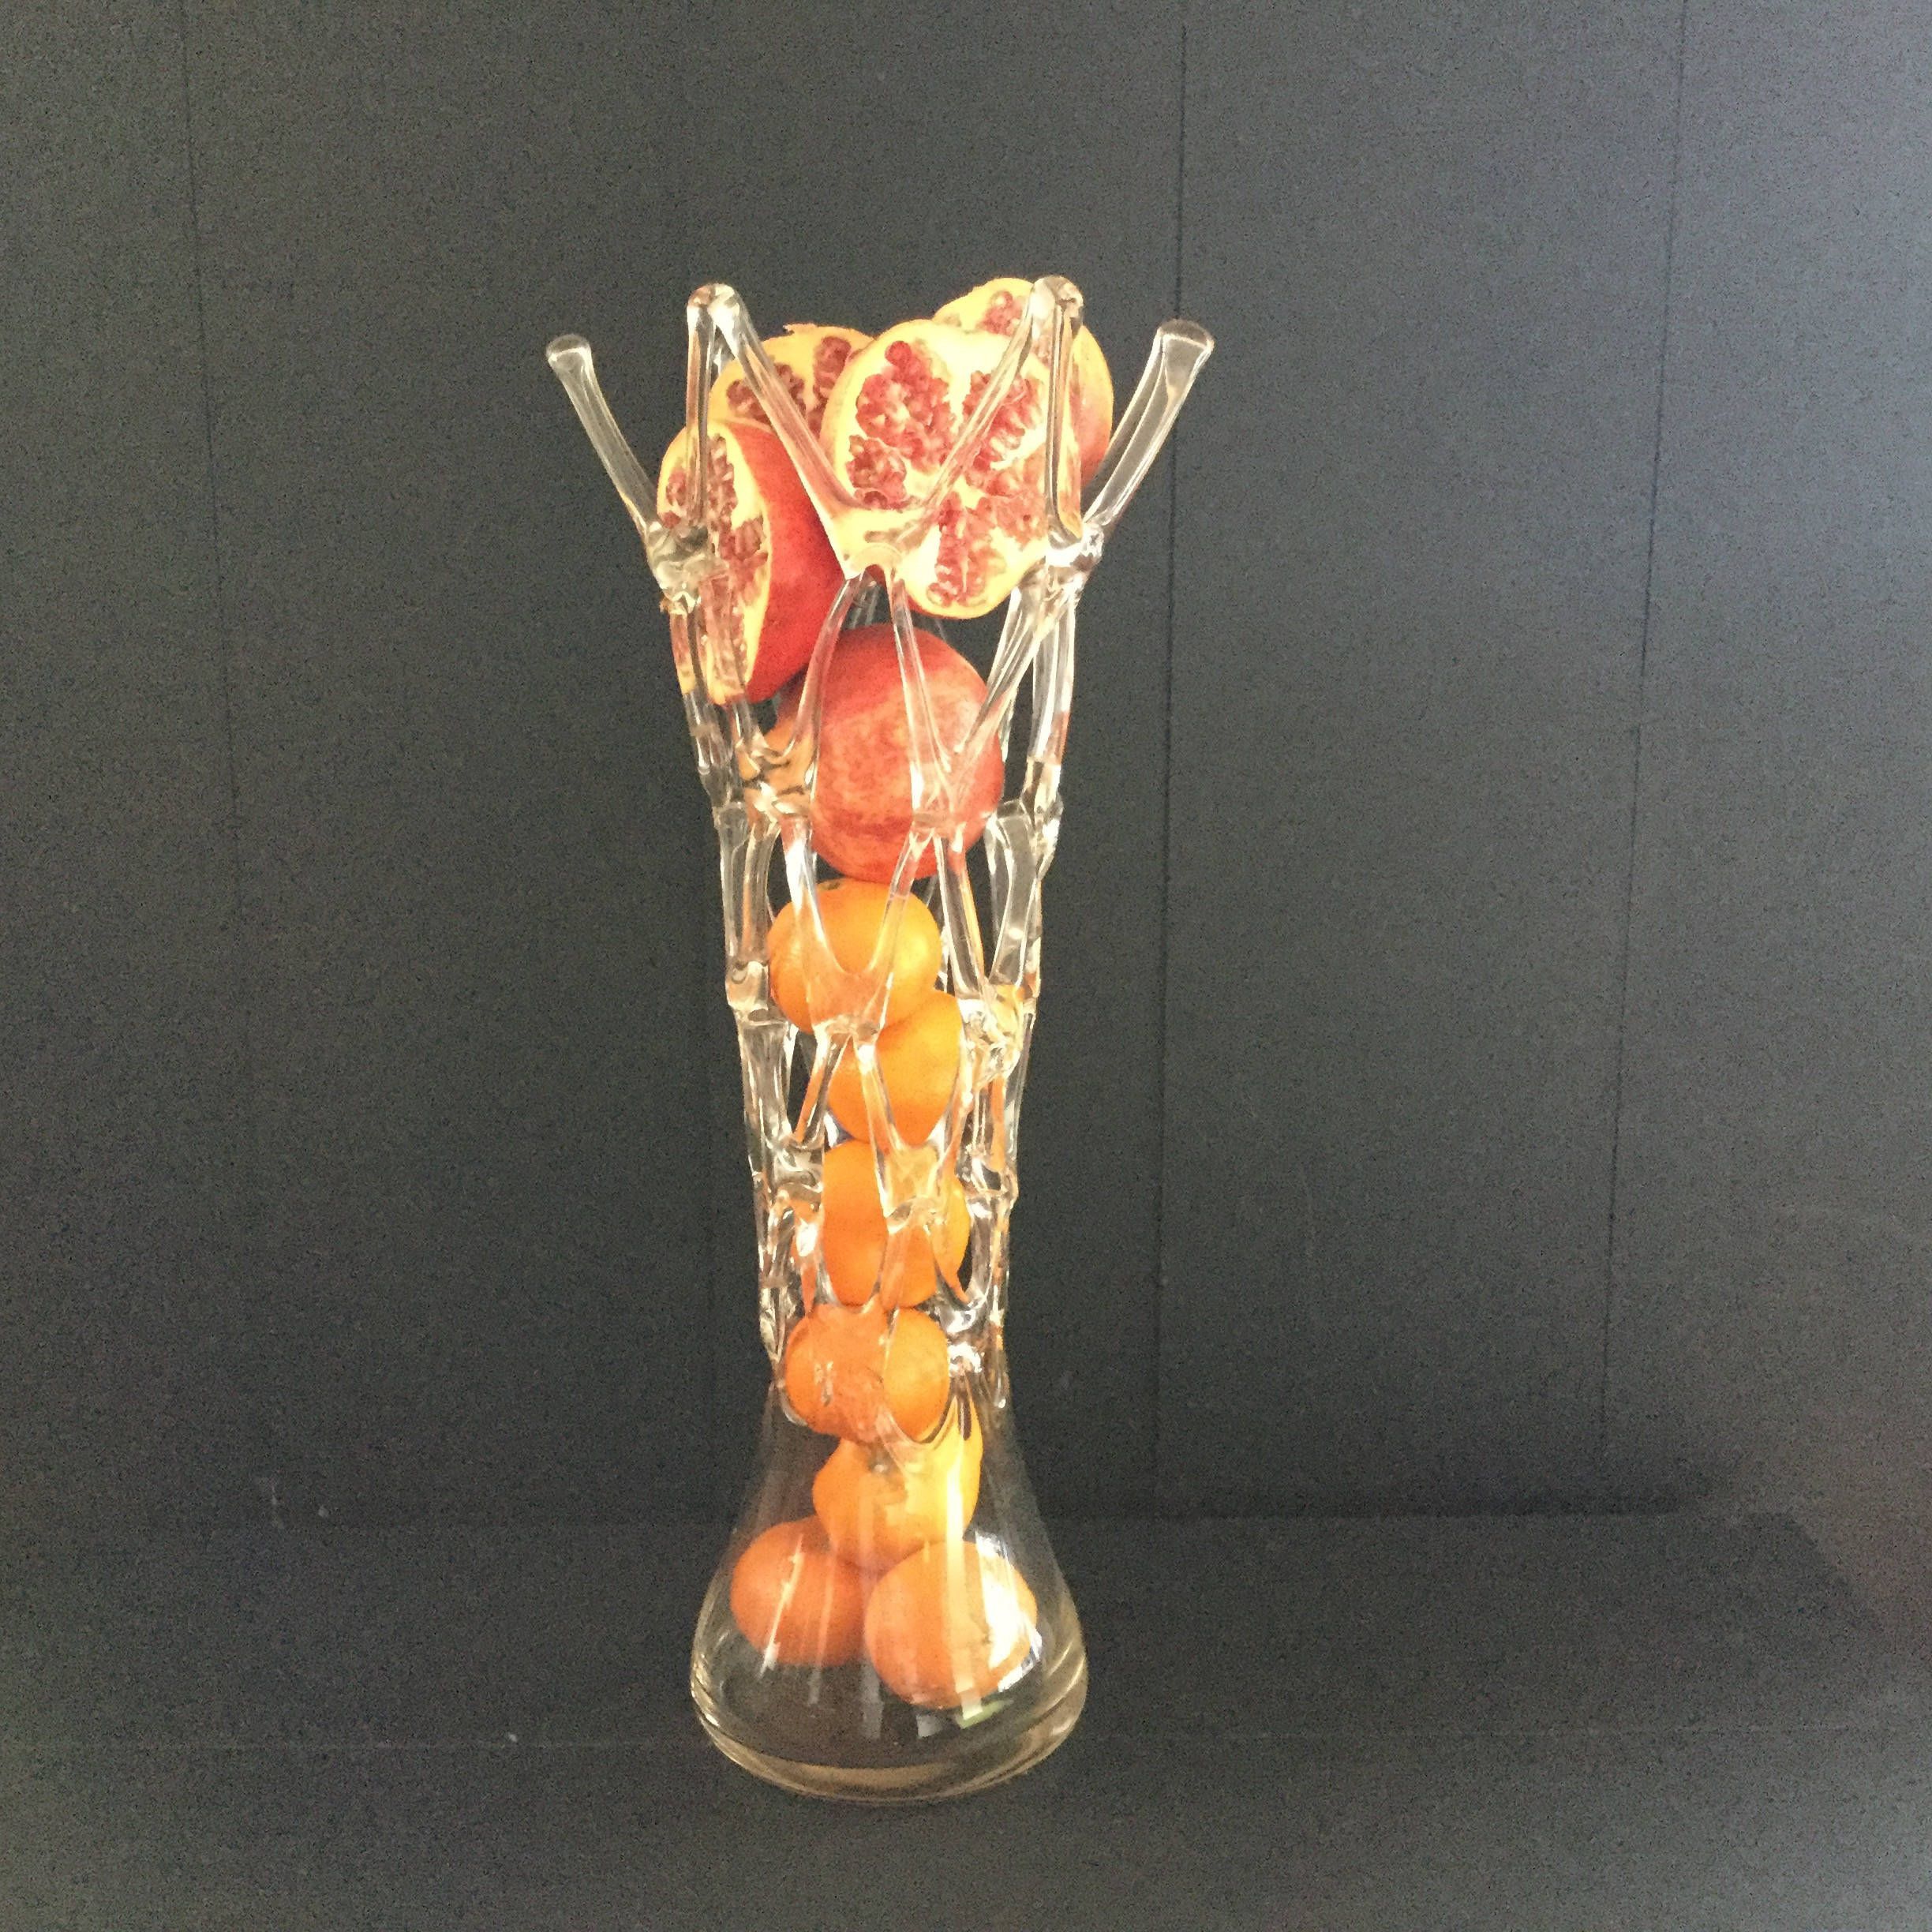 20 Popular Cracked Glass Vase 2024 free download cracked glass vase of stunning 19 high glass flower vase or dinner table center piece regarding stunning 19 high glass flower vase or dinner table center piece the cracked plate